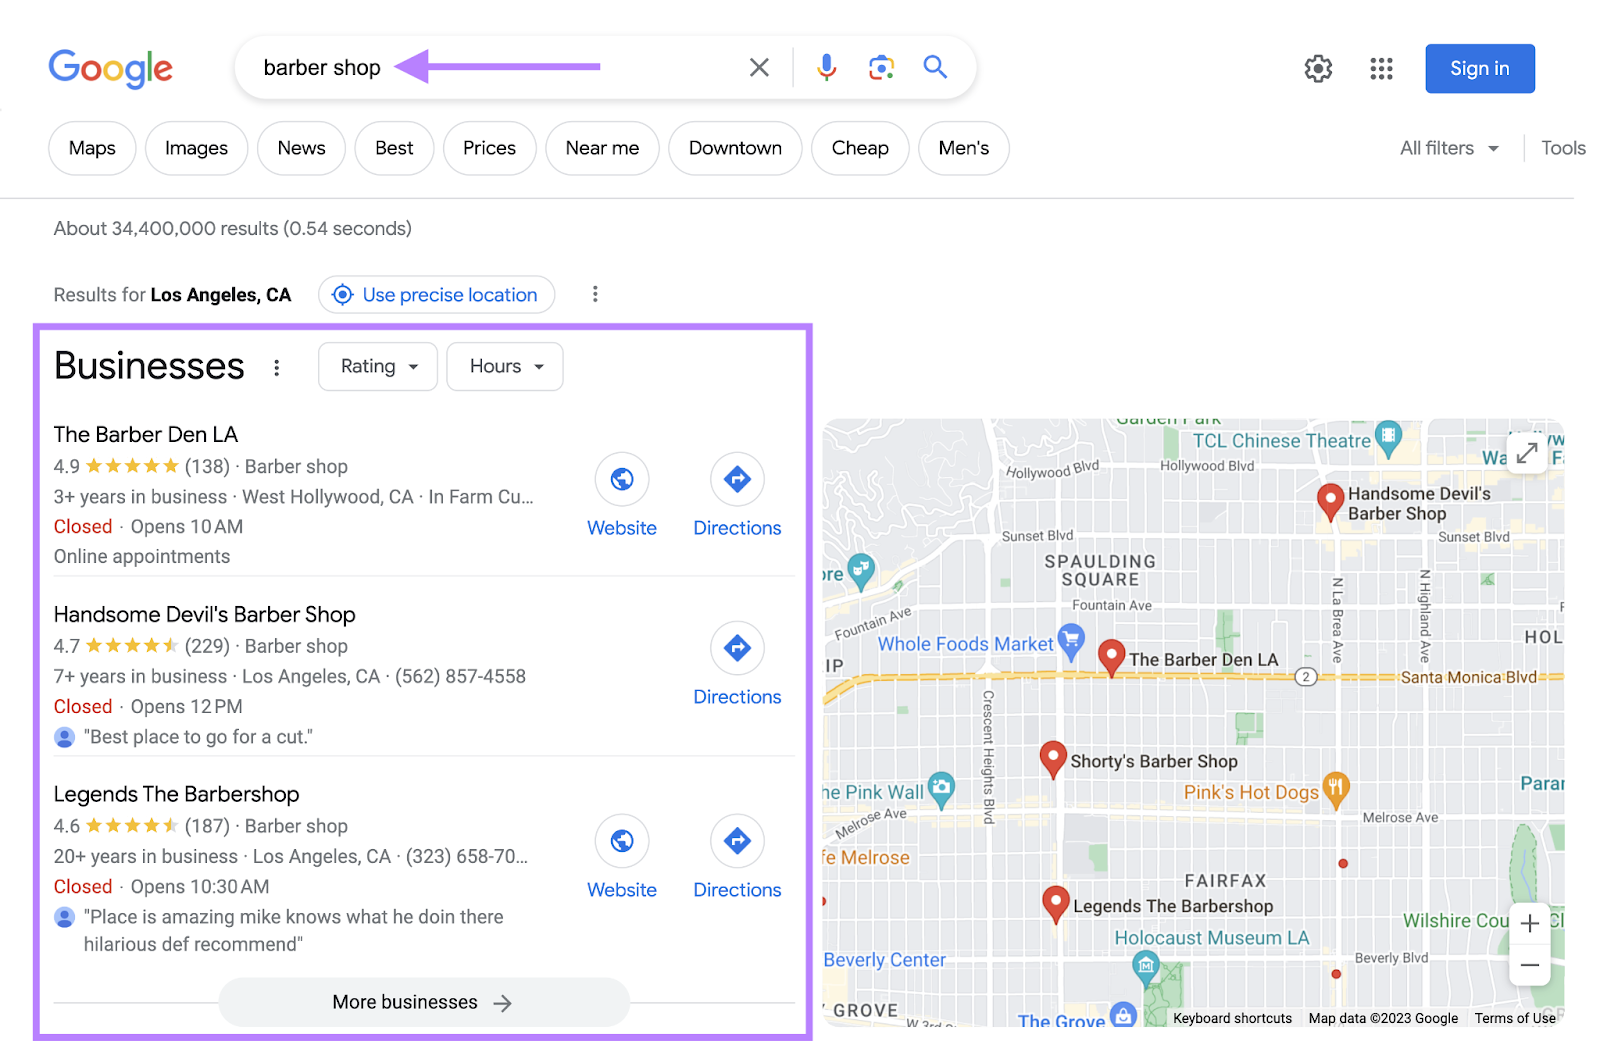 Google search in Los Angeles for “barber shops”